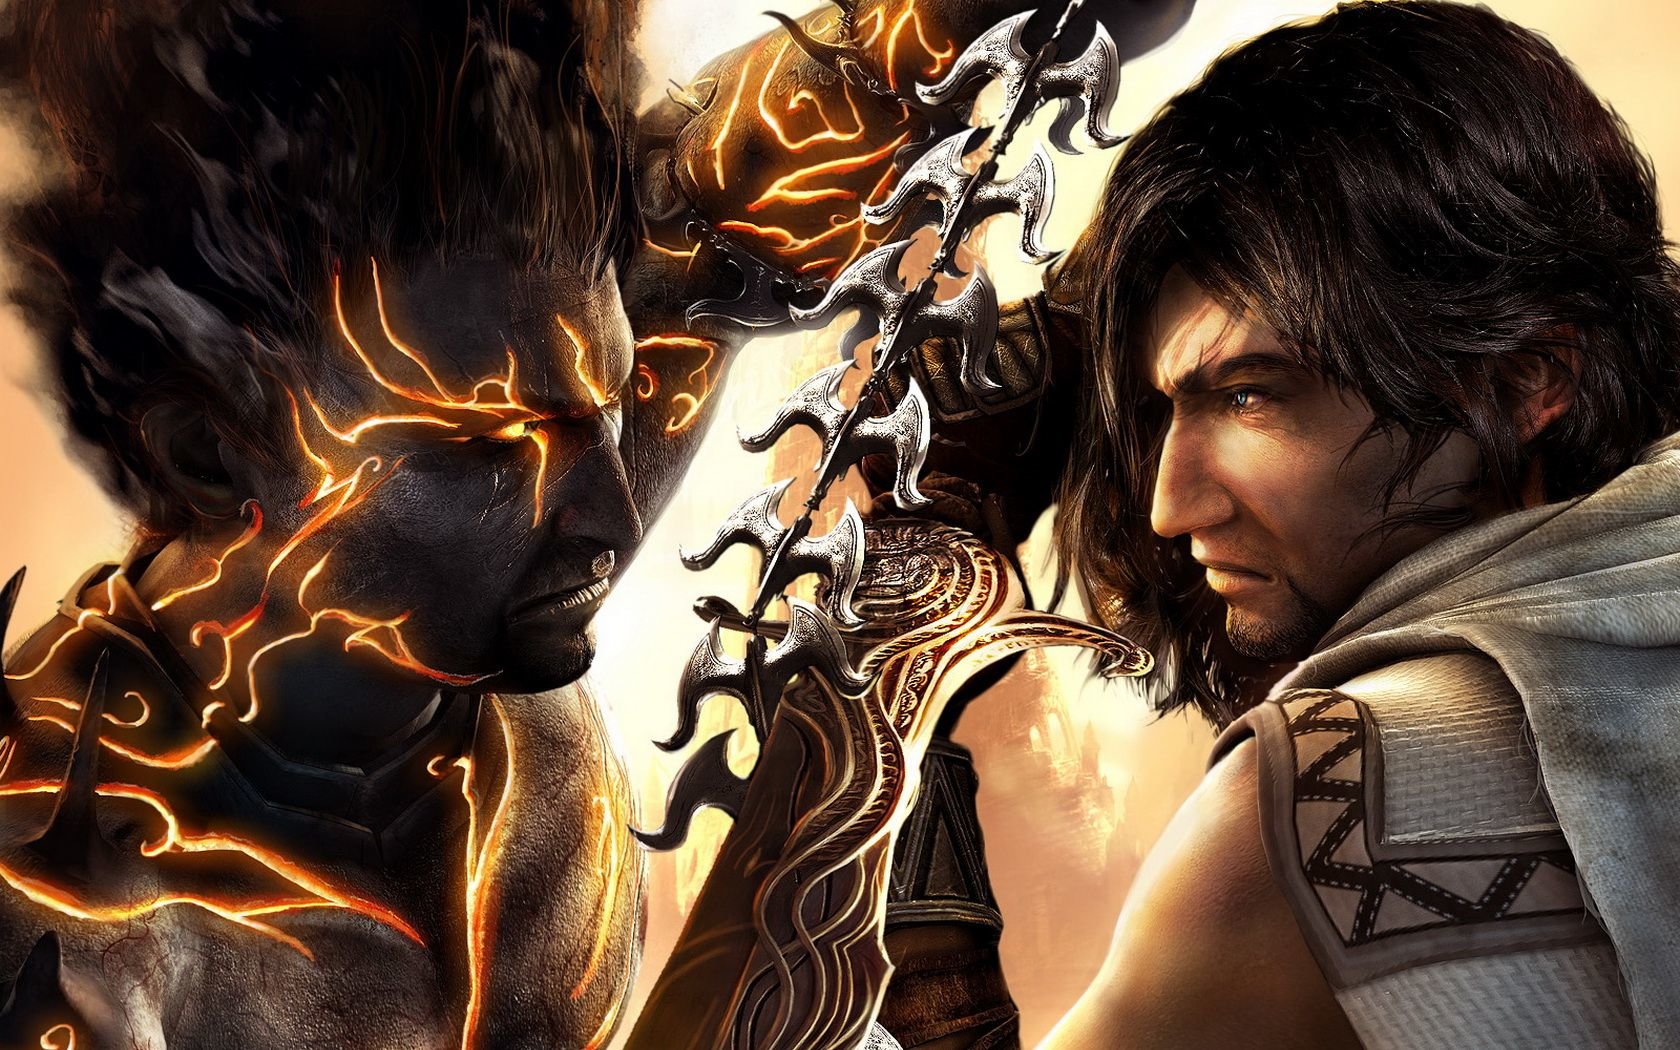 Prince of Persia The Two Thrones Wallpapers